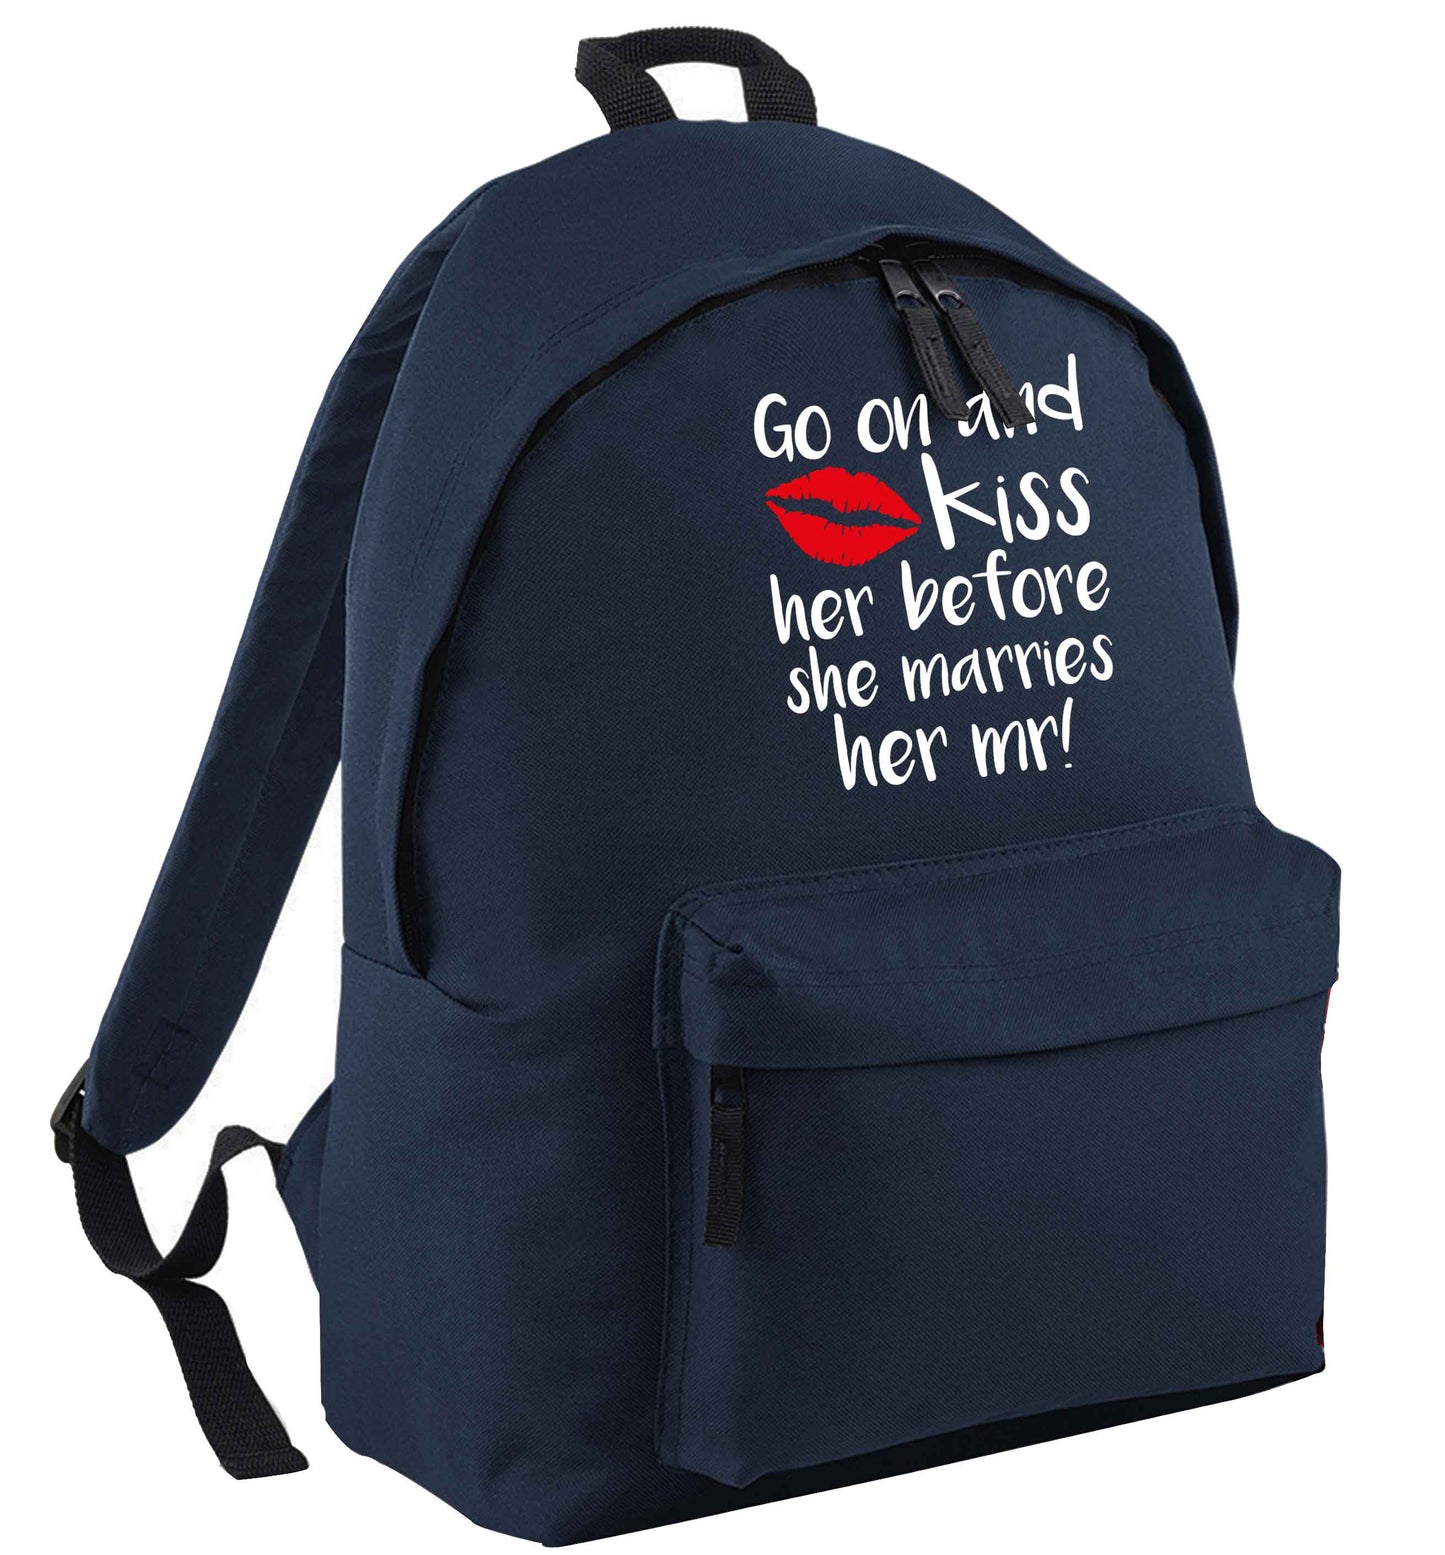 Kiss her before she marries her mr! navy adults backpack